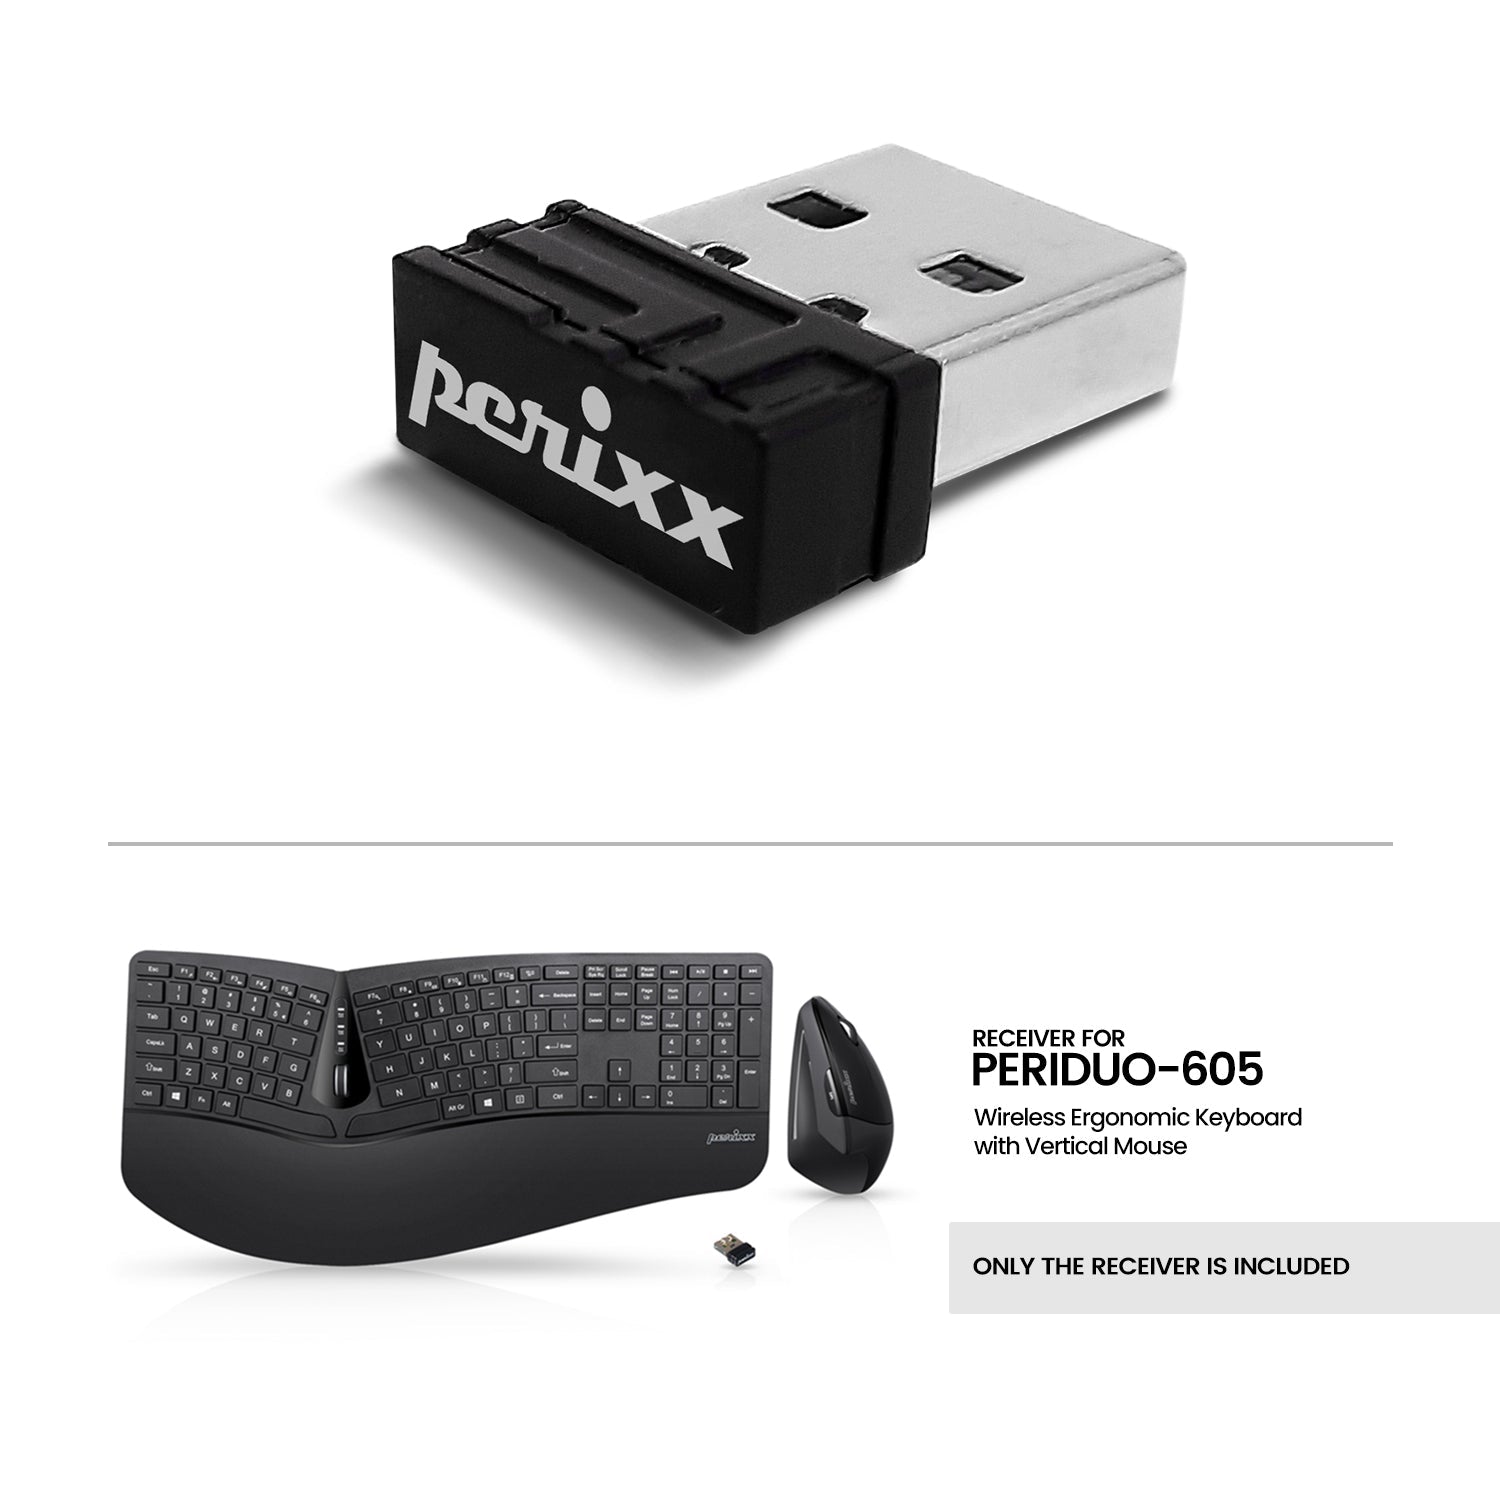 USB dongle receiver for PERIDUO-605 - Perixx Europe